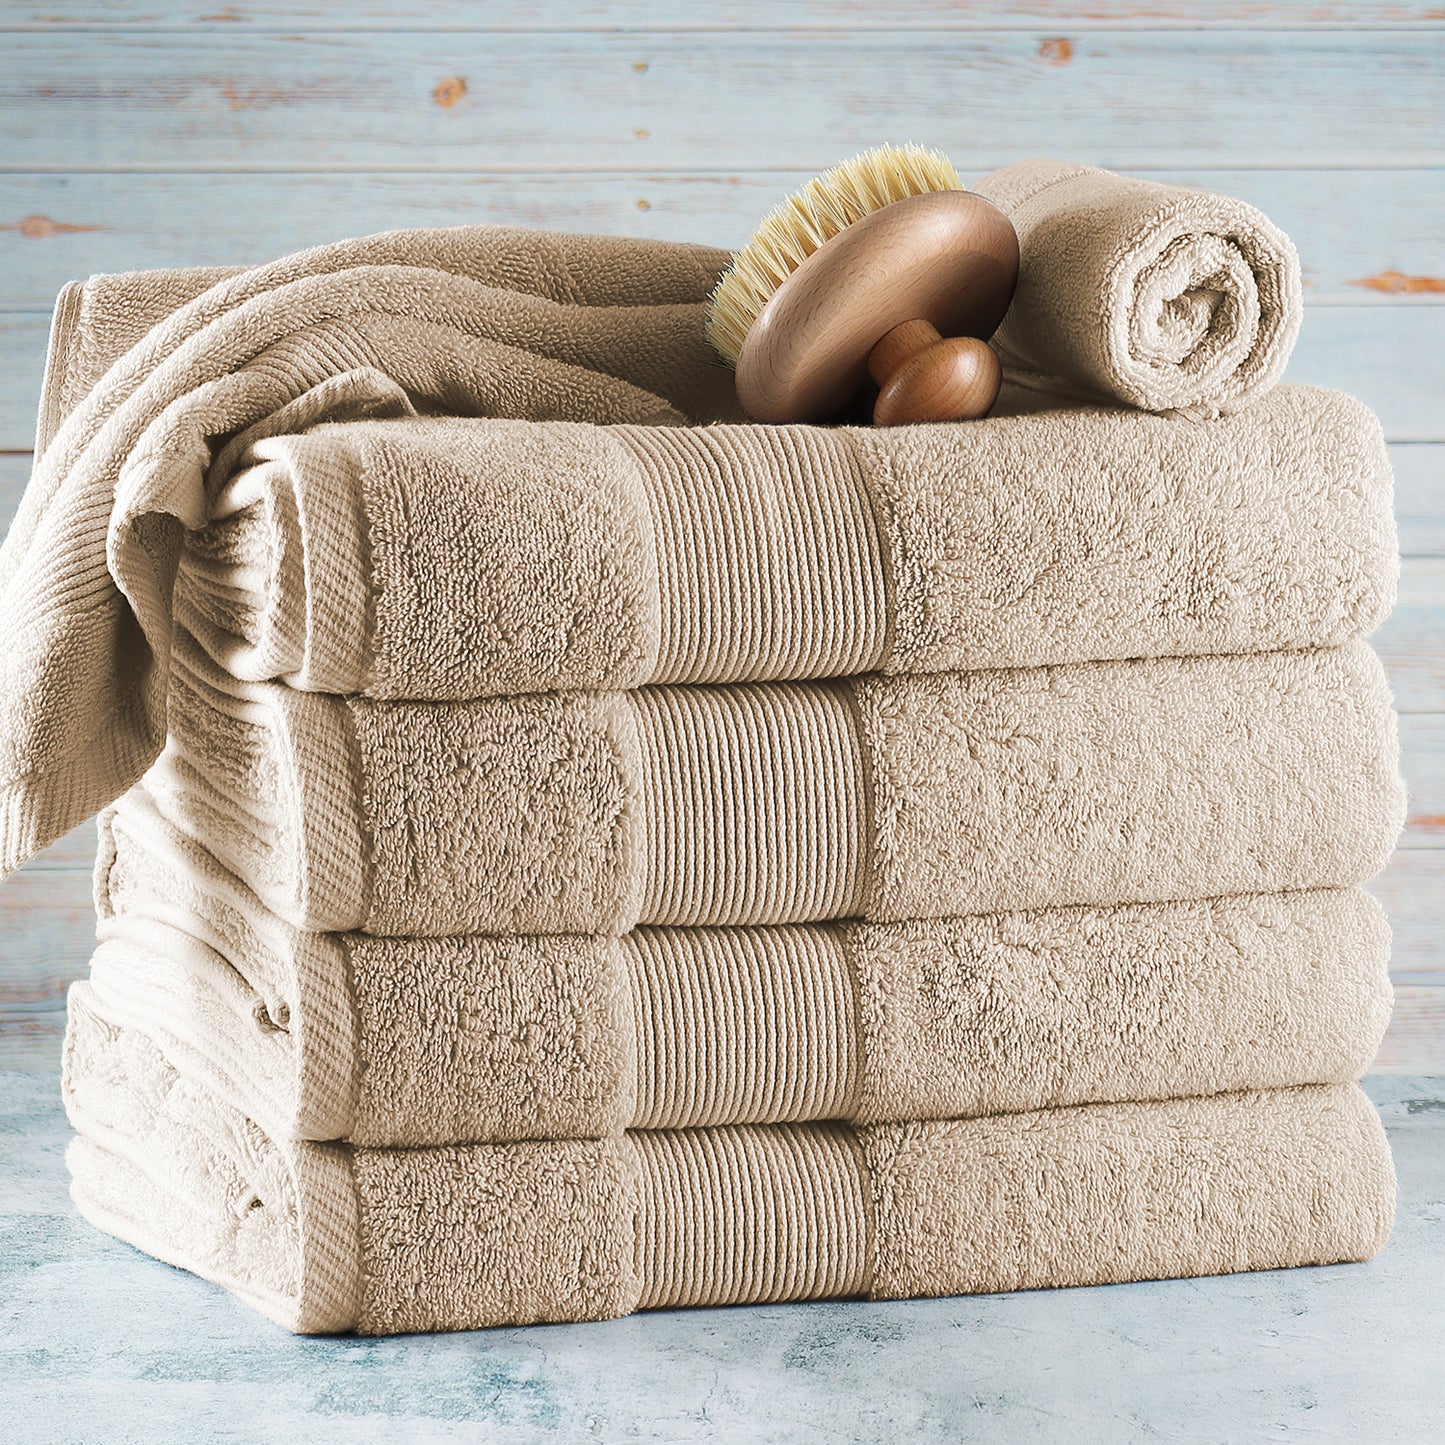 Hearth & Harbor 700 GSM Hand & Bath Towel Collection – 100% Cotton Luxury Set of 4 Bath Towels & 2 Wash Cloths – Ultra Soft & Highly Absorbent Beach, Spa & Bathroom Body Shower Towels